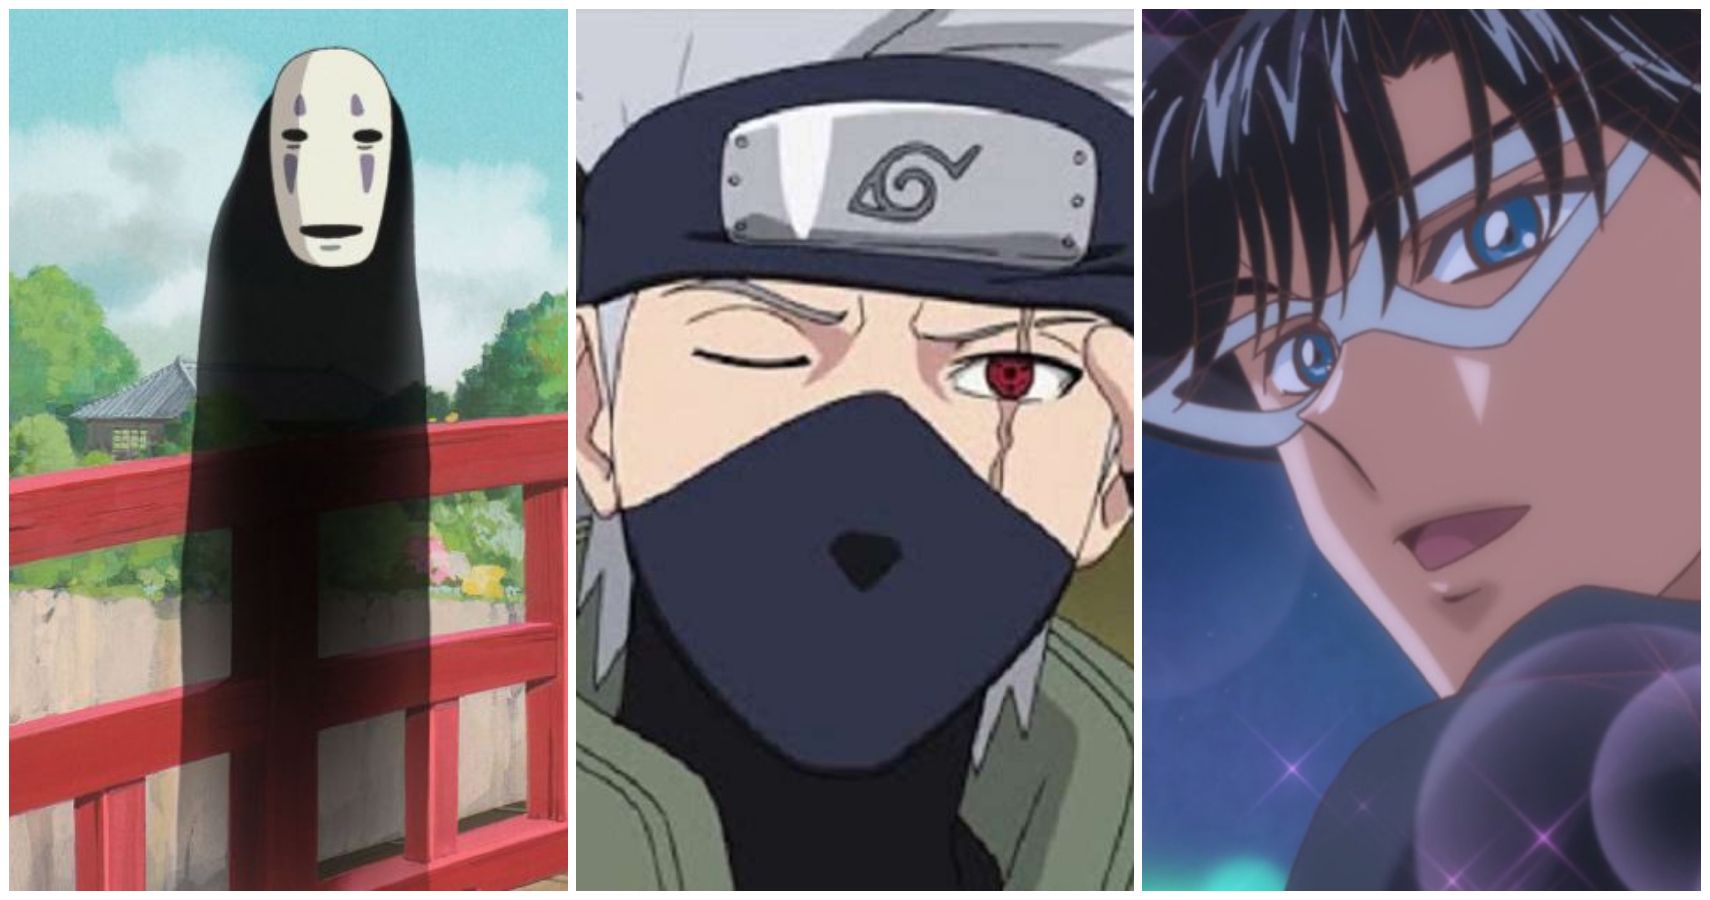 10 Coolest Masks In Anime Ranked - Pagelagi